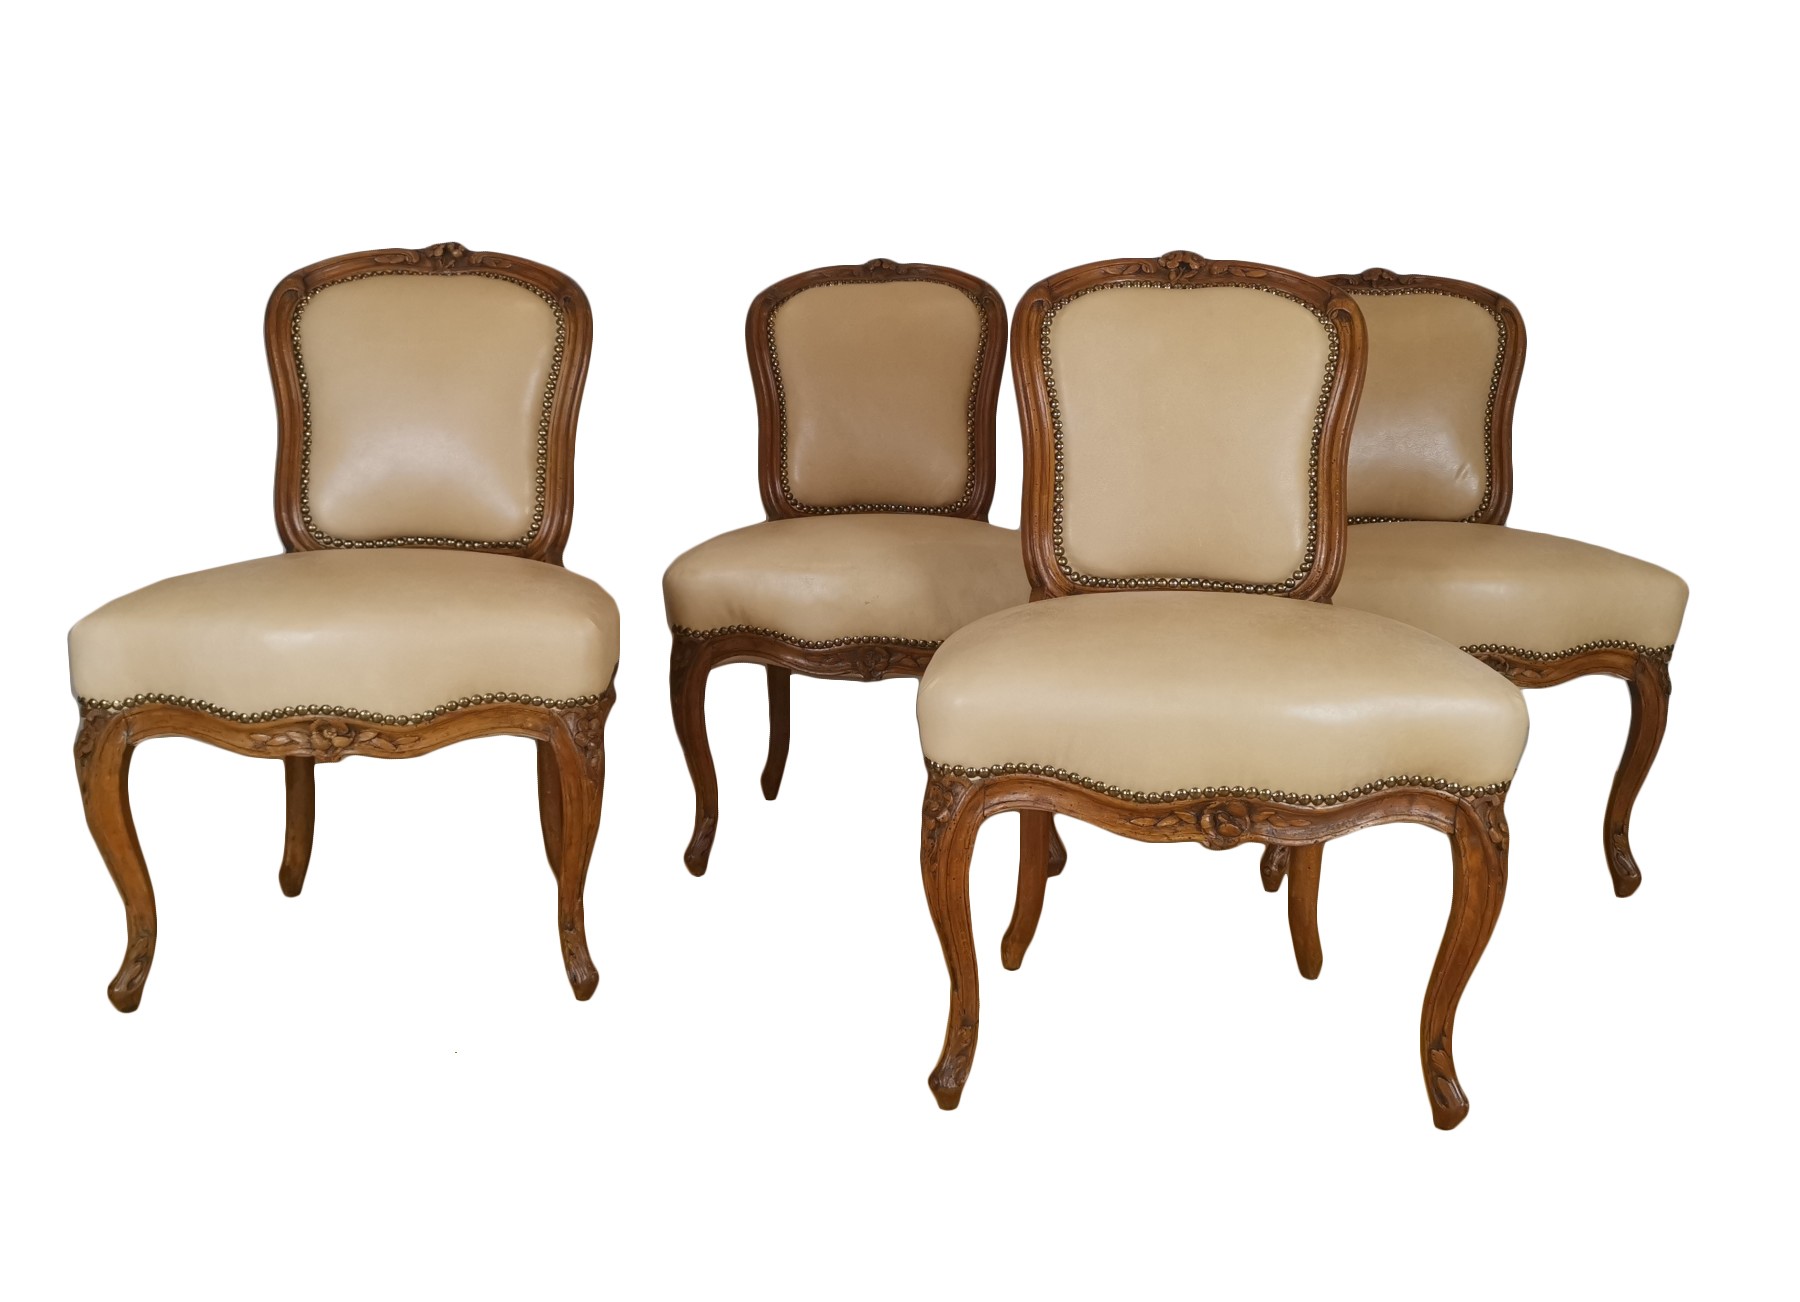 A Louis Xv Set Of Four Chairs Mid 18th Century Circa 1750 Ref 79323